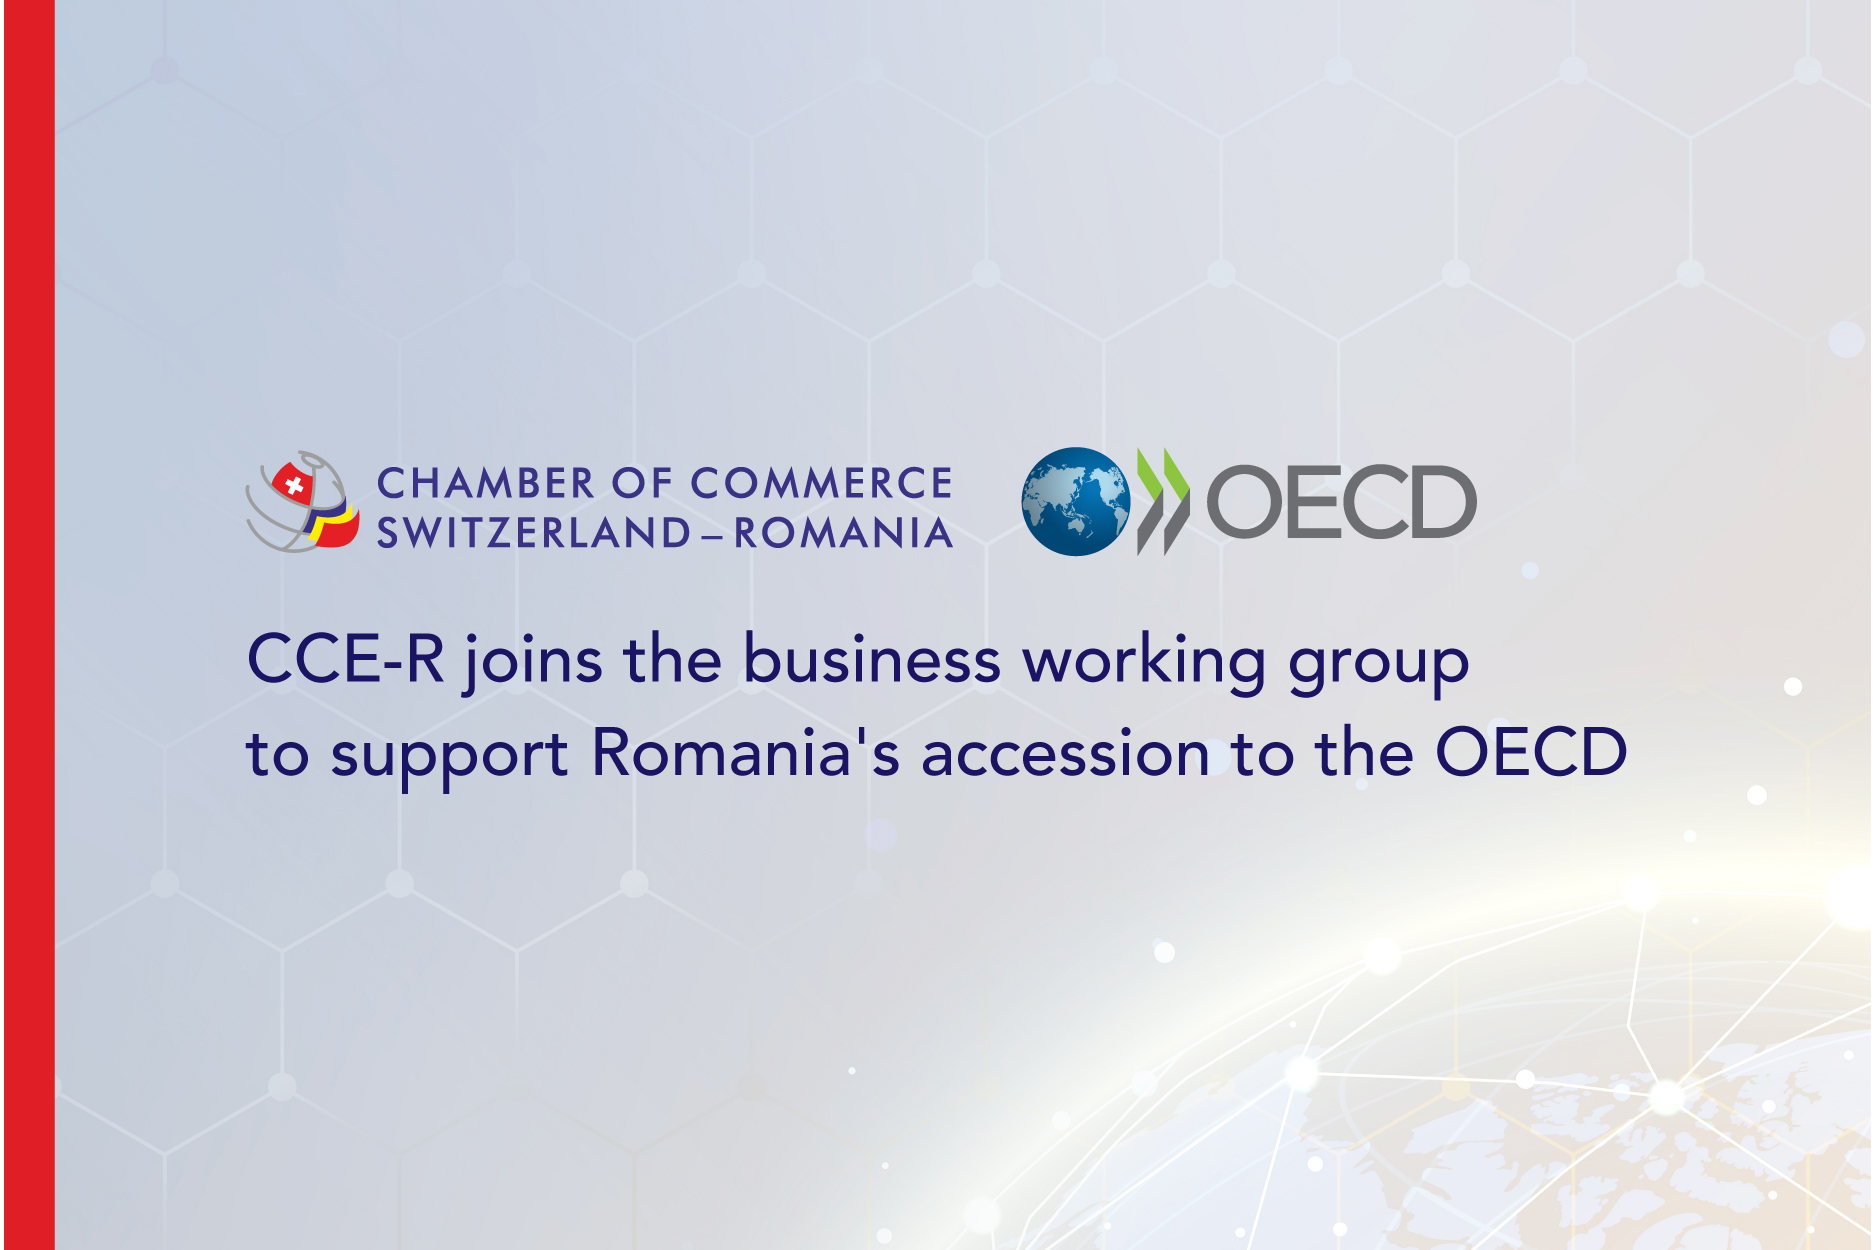 CCE-R joins the business working group to support Romania's accession to the OECD